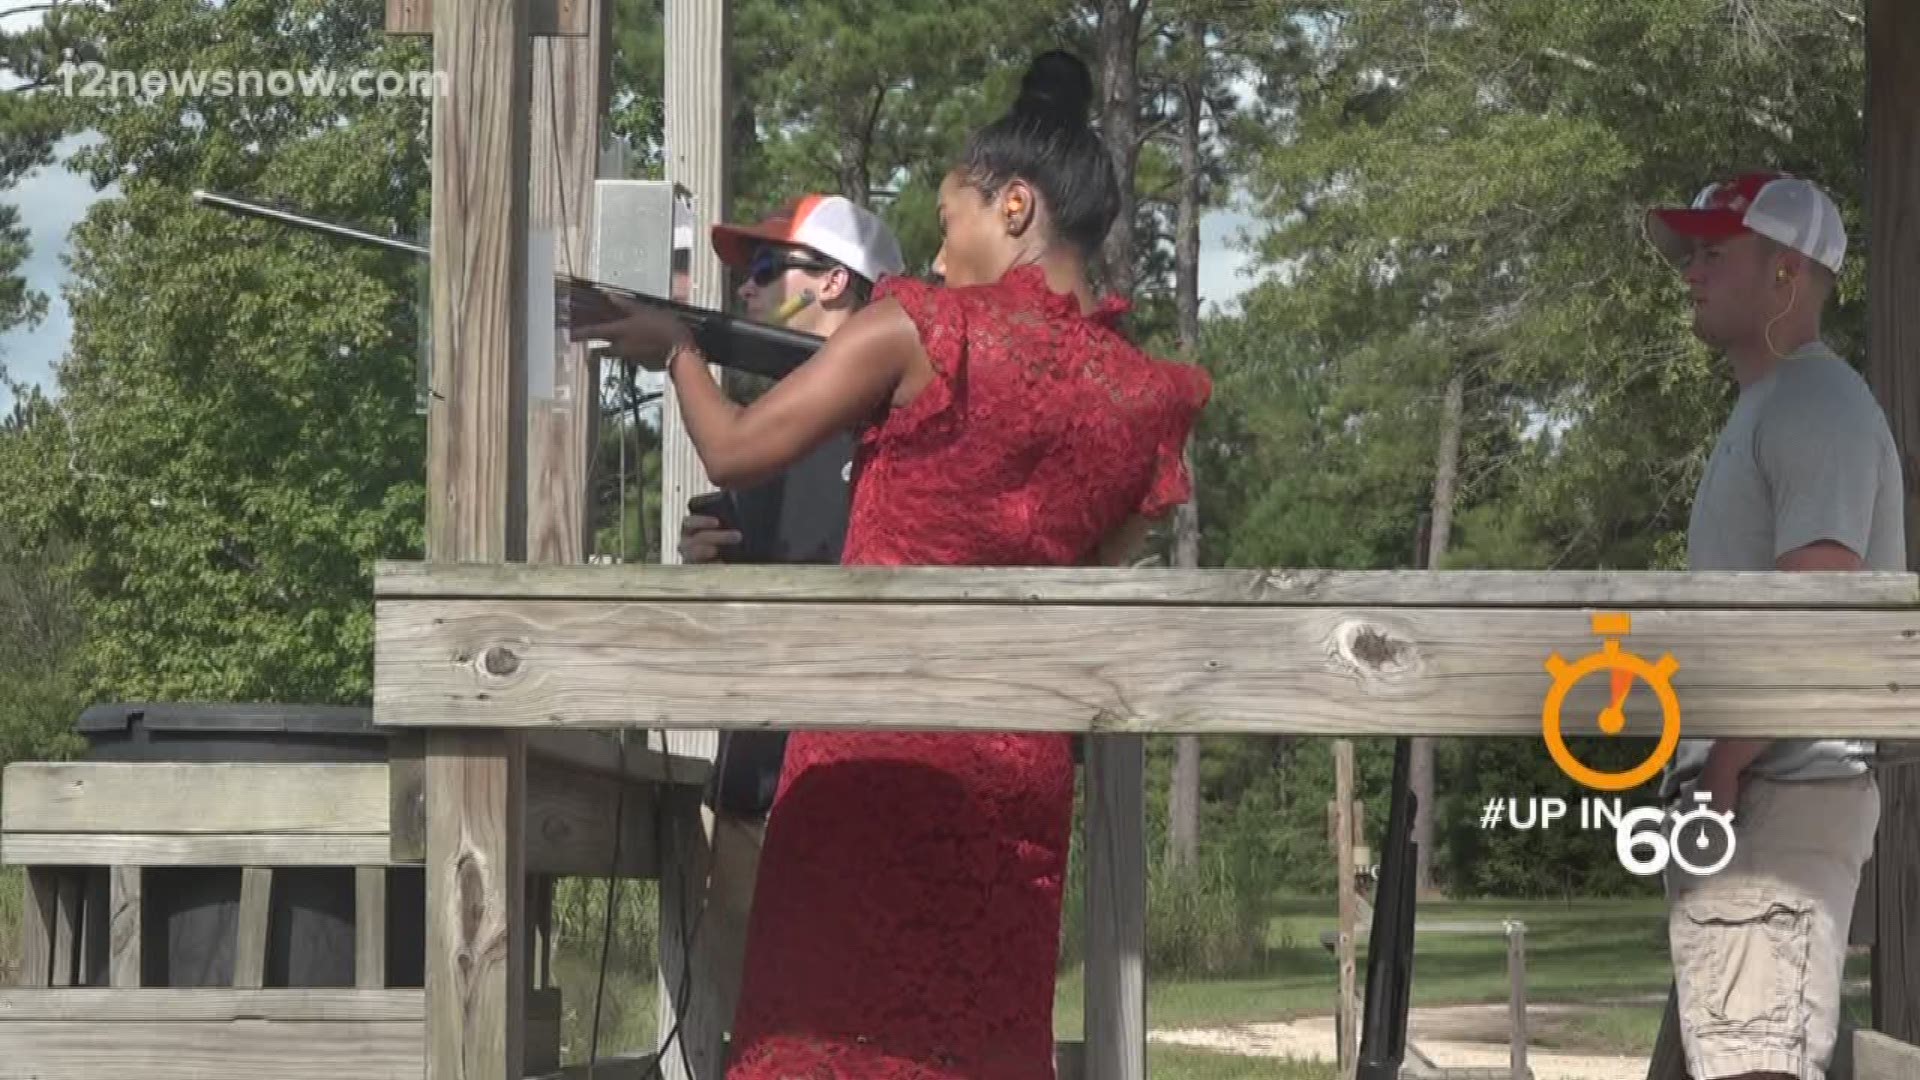 12News reporter Rachel Keller heads out to the One in One Hundred Gun Club in Lumberton to see if she has what it takes to compete in the competition on Saturday, August 17th.